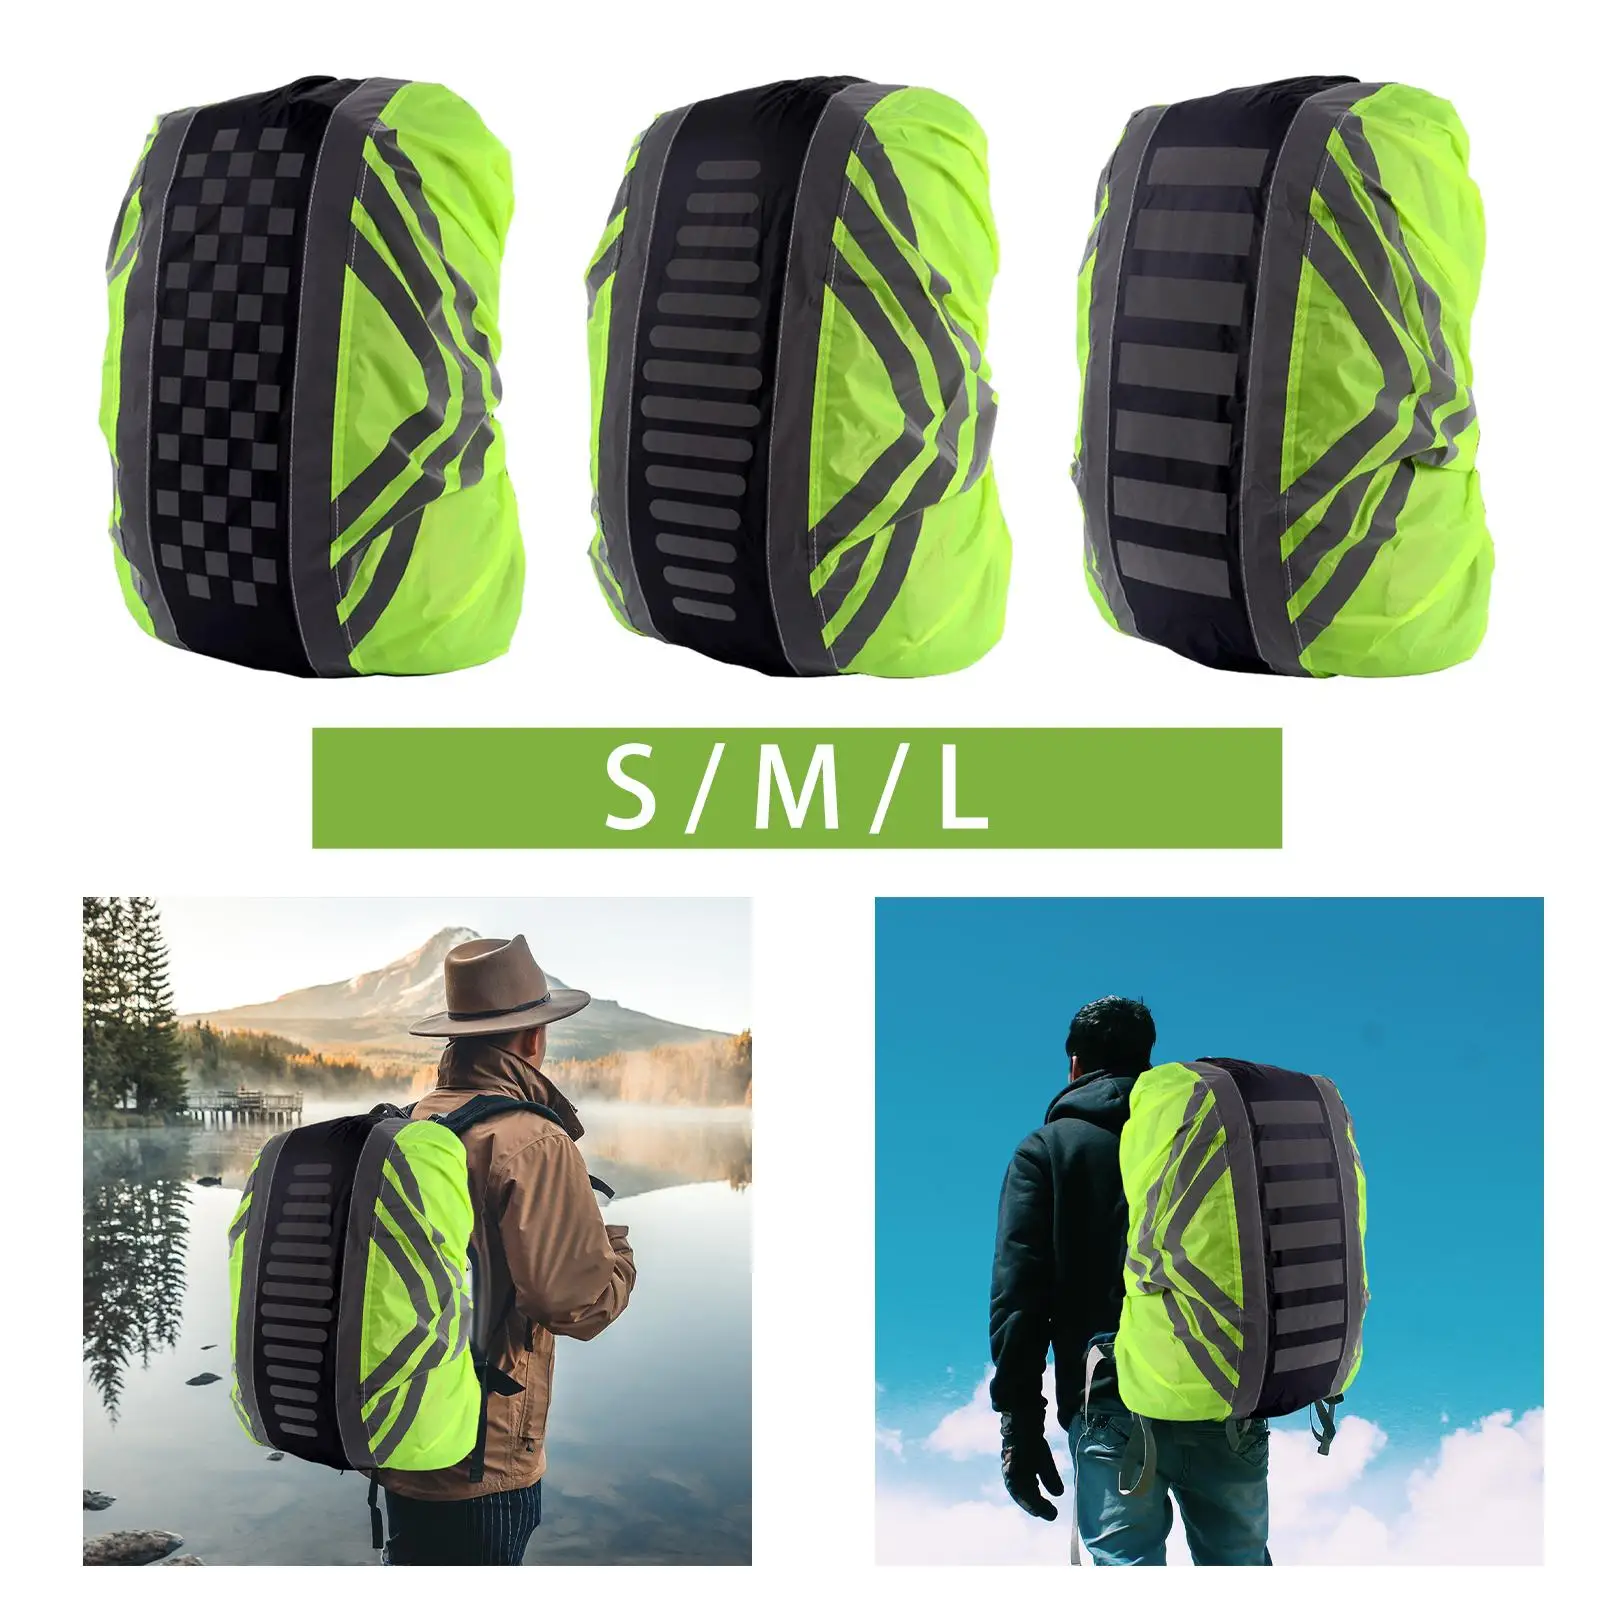 Backpack Rain Cover Waterproof High Visibility with Reflective Strip Rucksack Covers for Camping Traveling Outdoor Activities